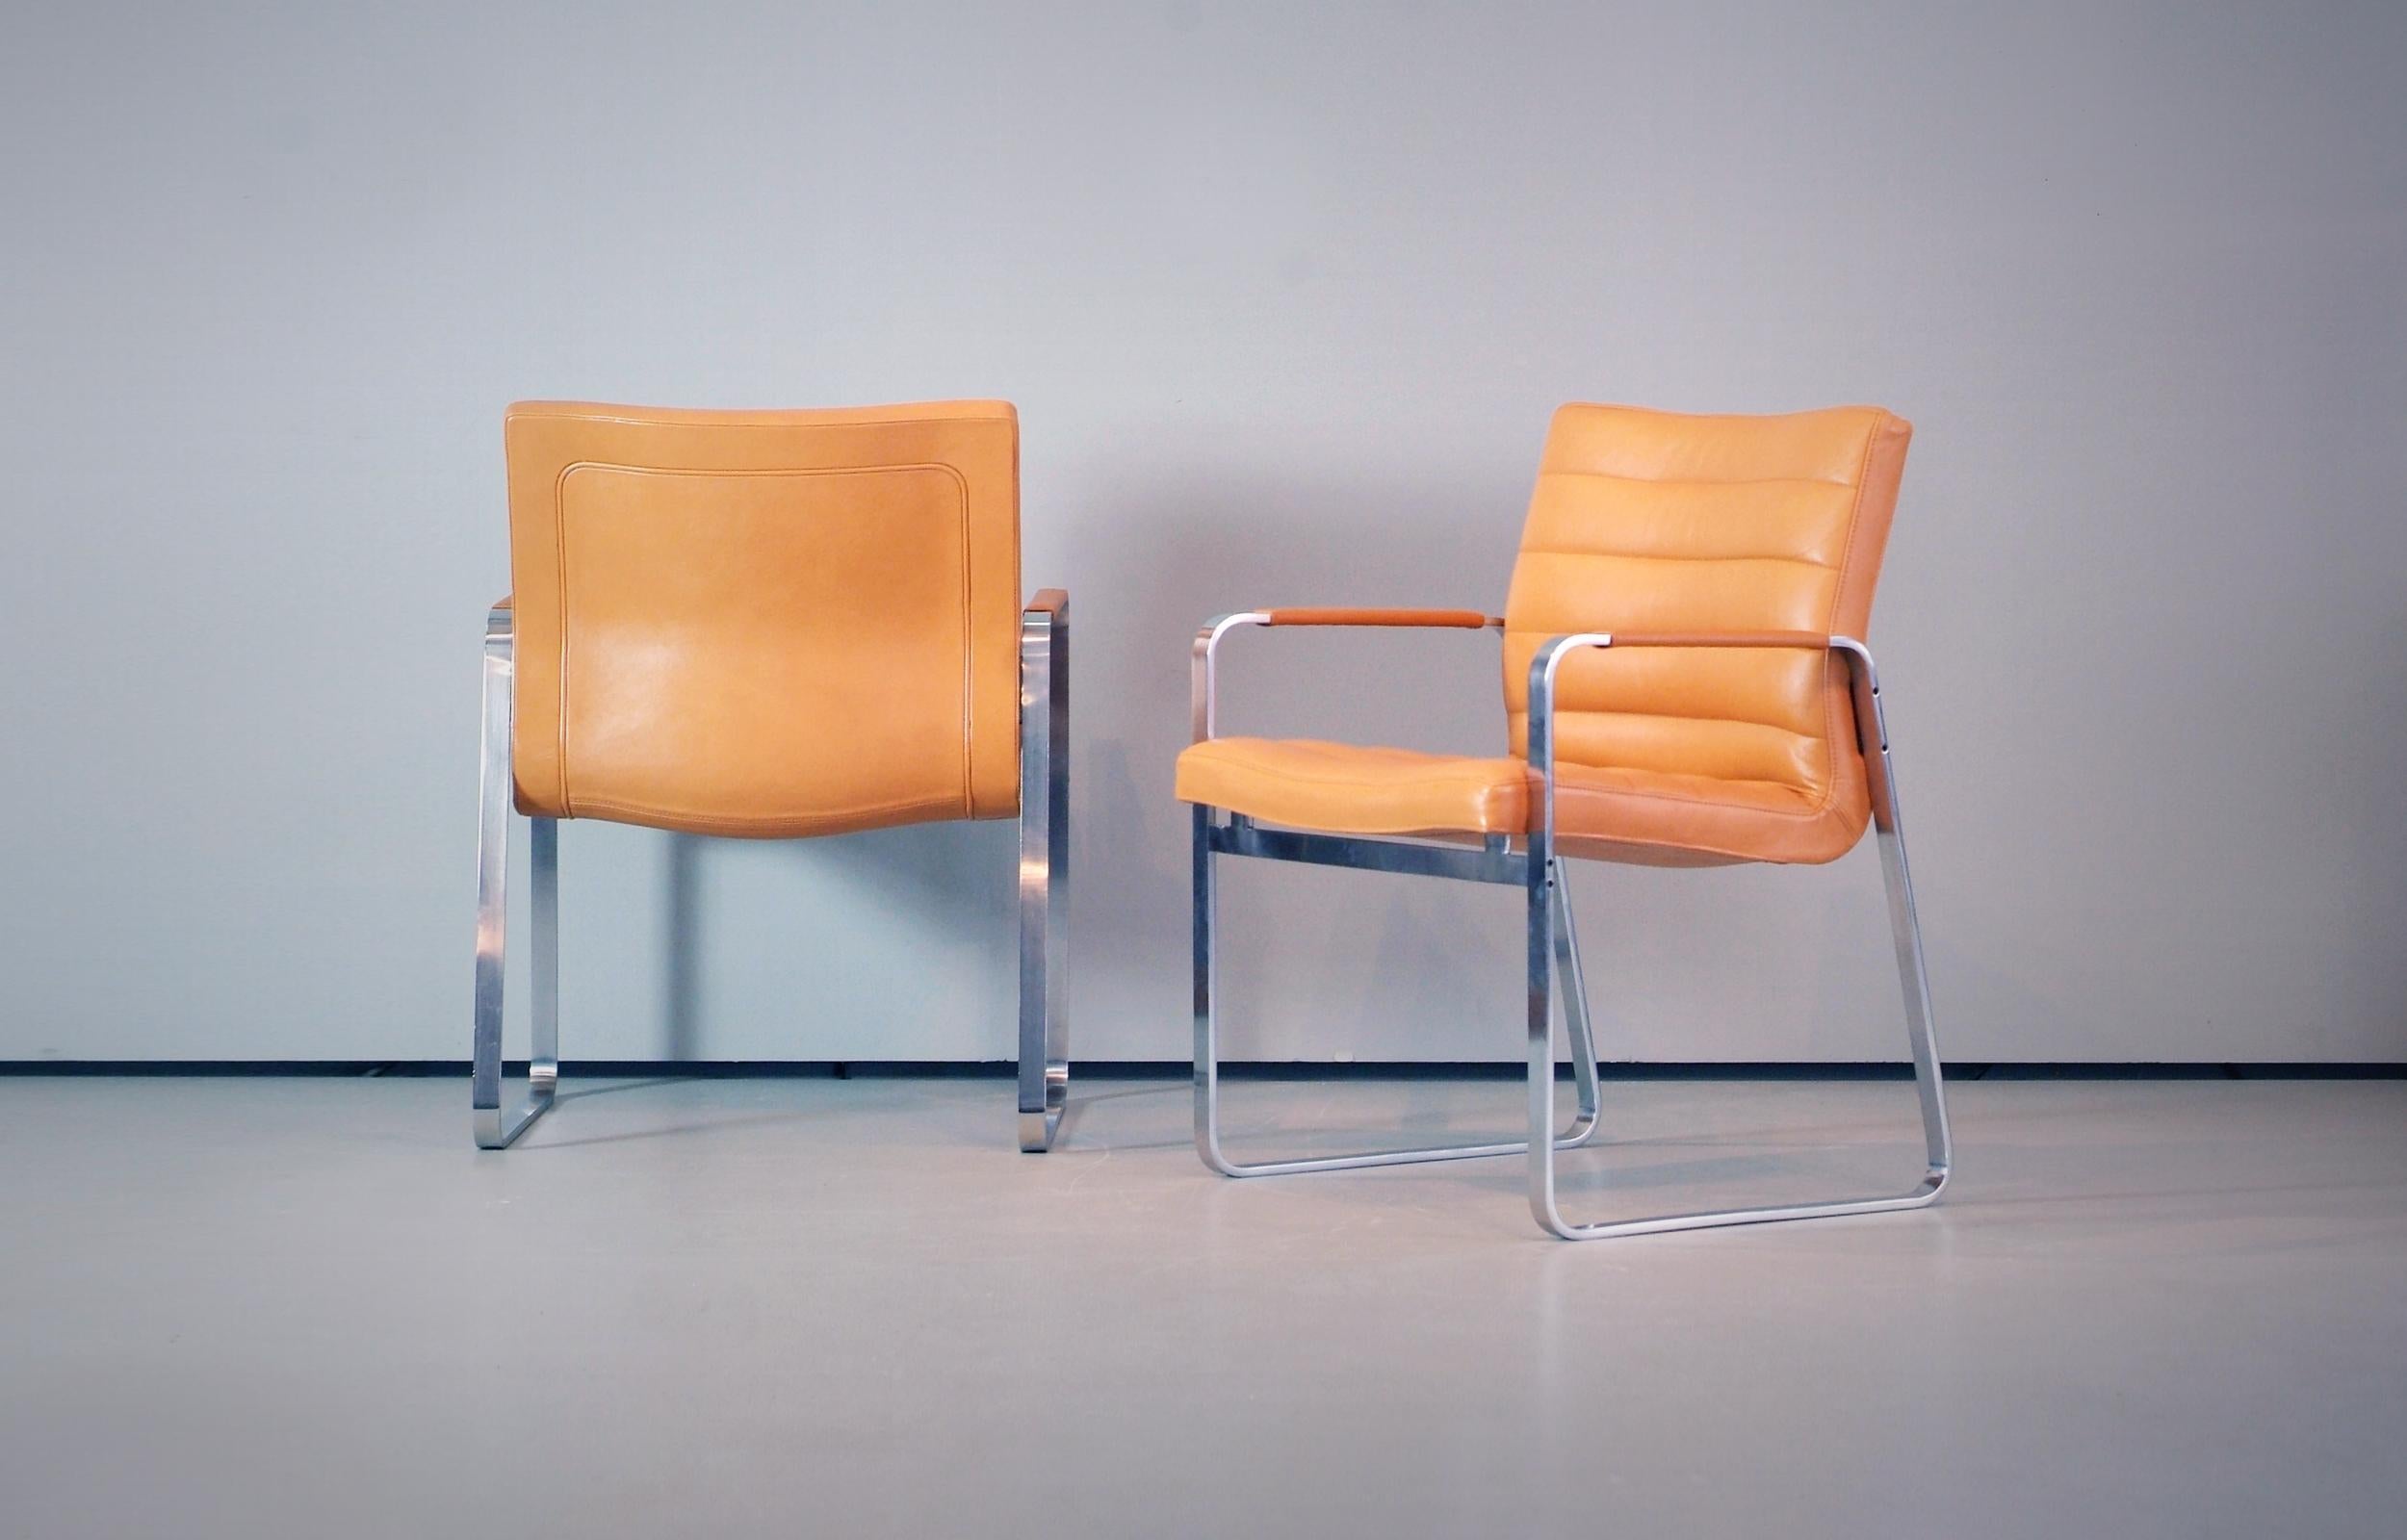 A wonderful set of chairs designed by J. Lund and O. Larsen made by BO-EX Mod. BO-850 in the late 1960s-early 1970s, original cognac / light brown leather seat / back matte chromed steel base. 

Perfect vintage condition with only minimal wear.